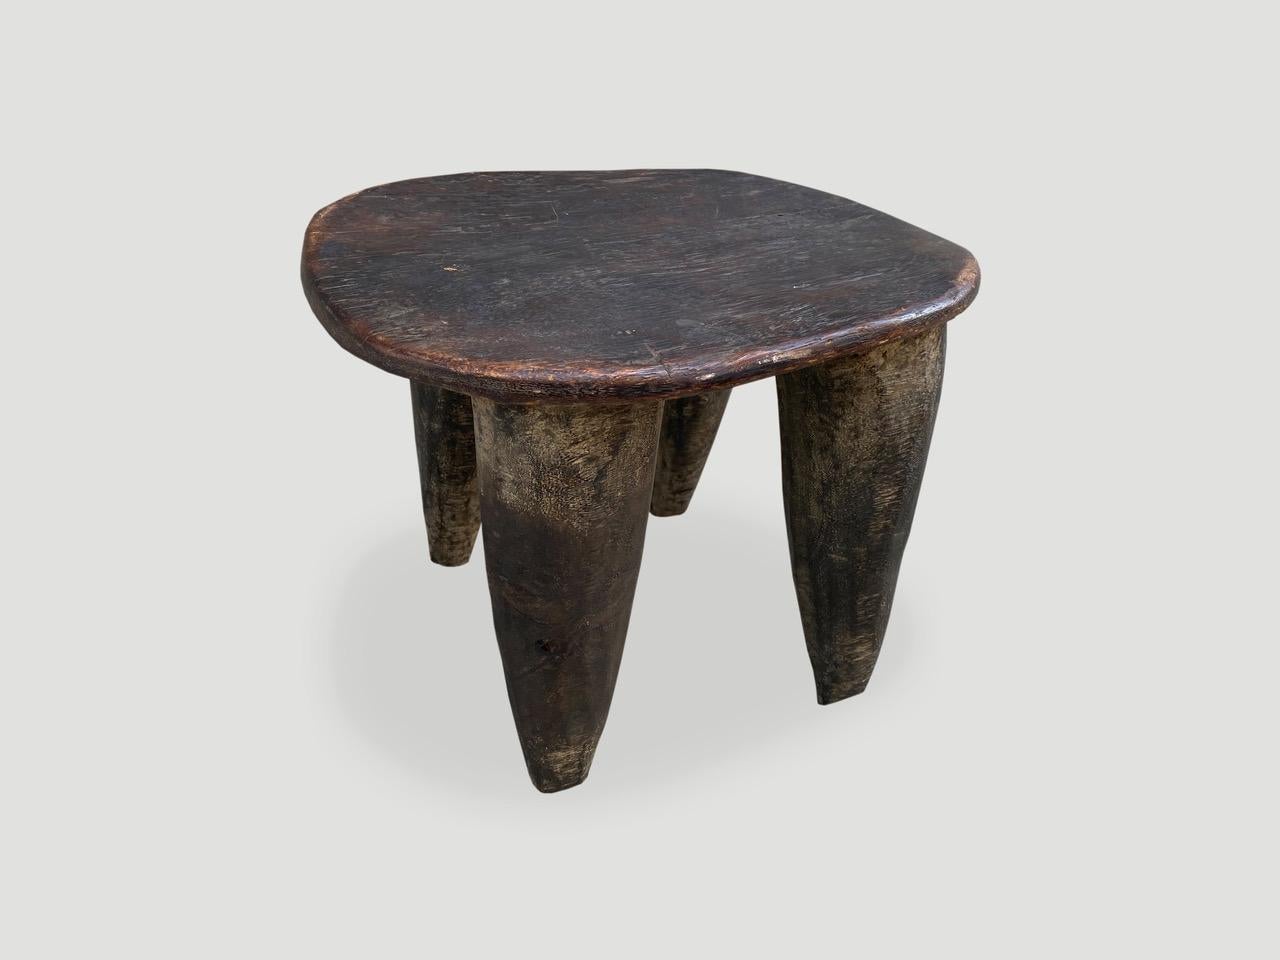 Lovely patina on this beautiful African stool hand carved from a single block of wood. Great for placing a book or perhaps towels in a bathroom, magazines etc.

This stool was sourced in the spirit of wabi-sabi, a Japanese philosophy that beauty